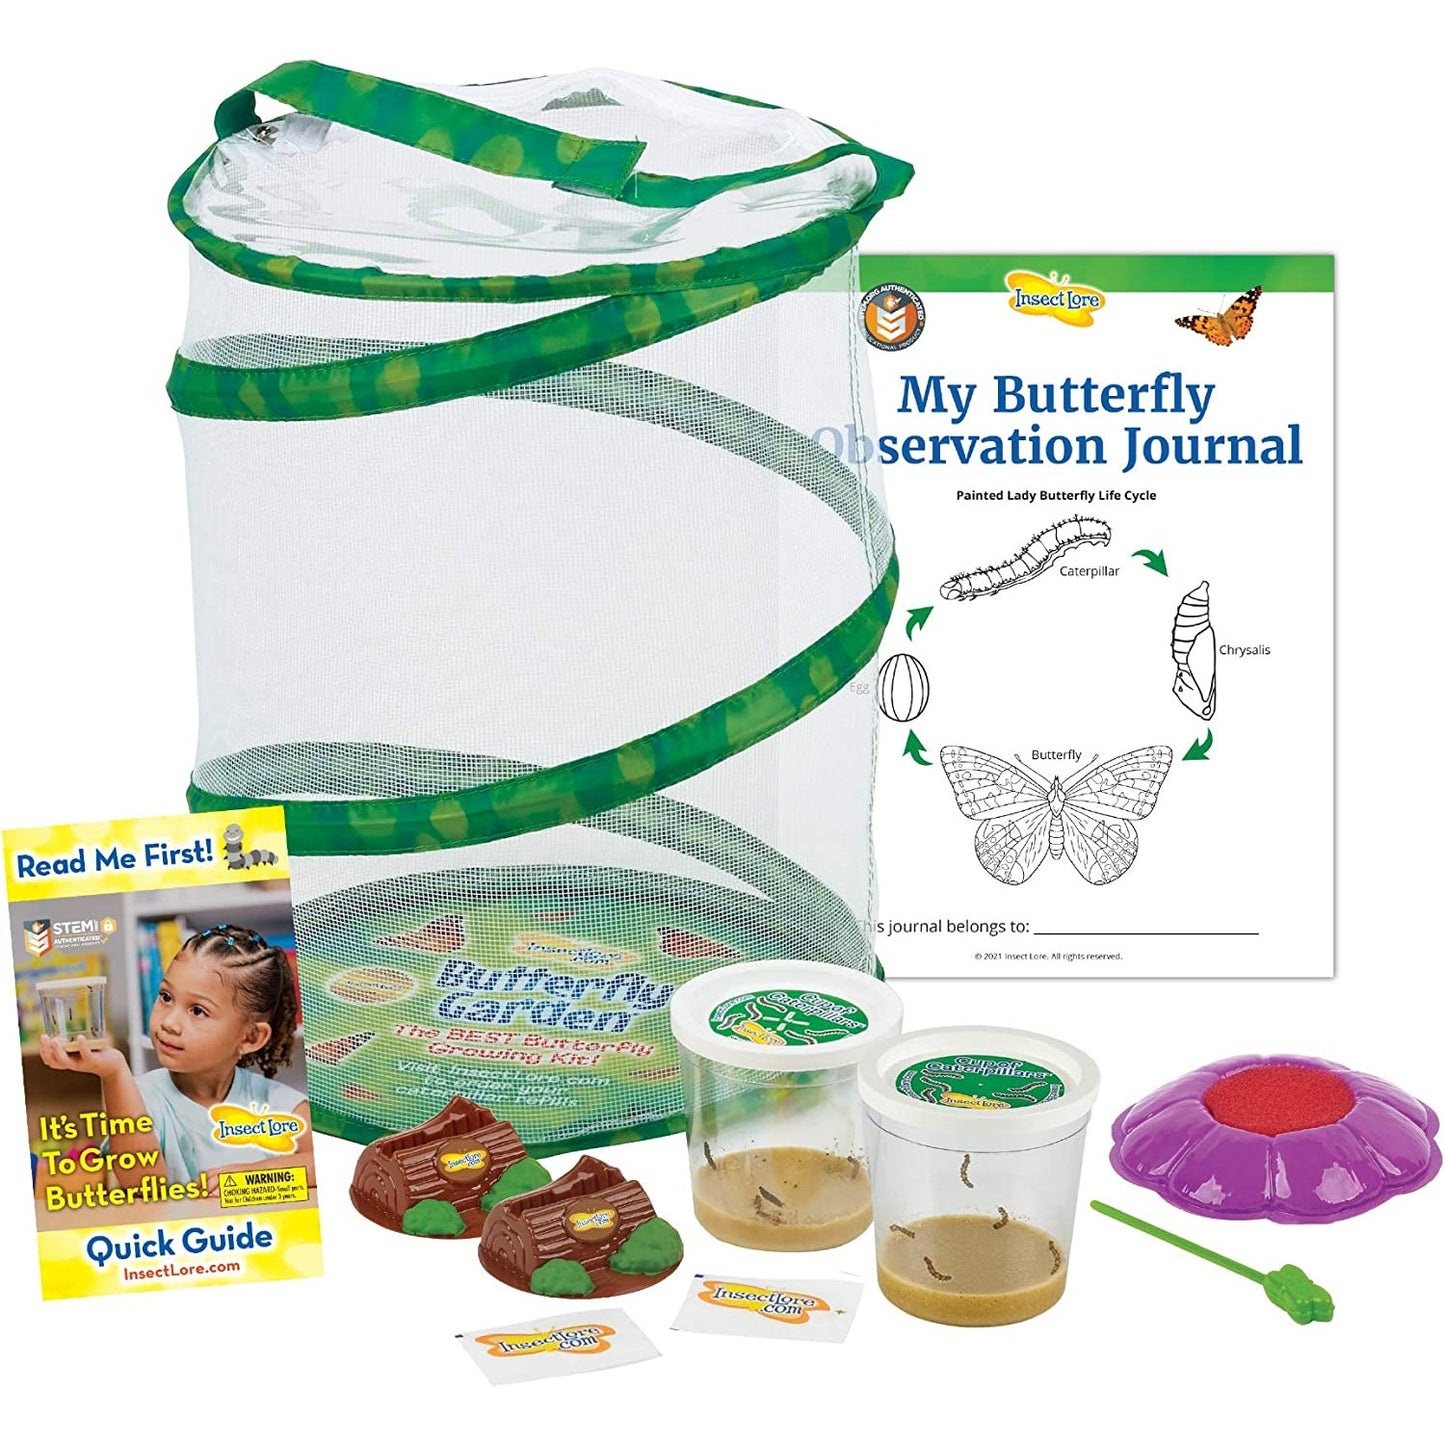 A butterfly growing kit garden with all the inclusions are shown.